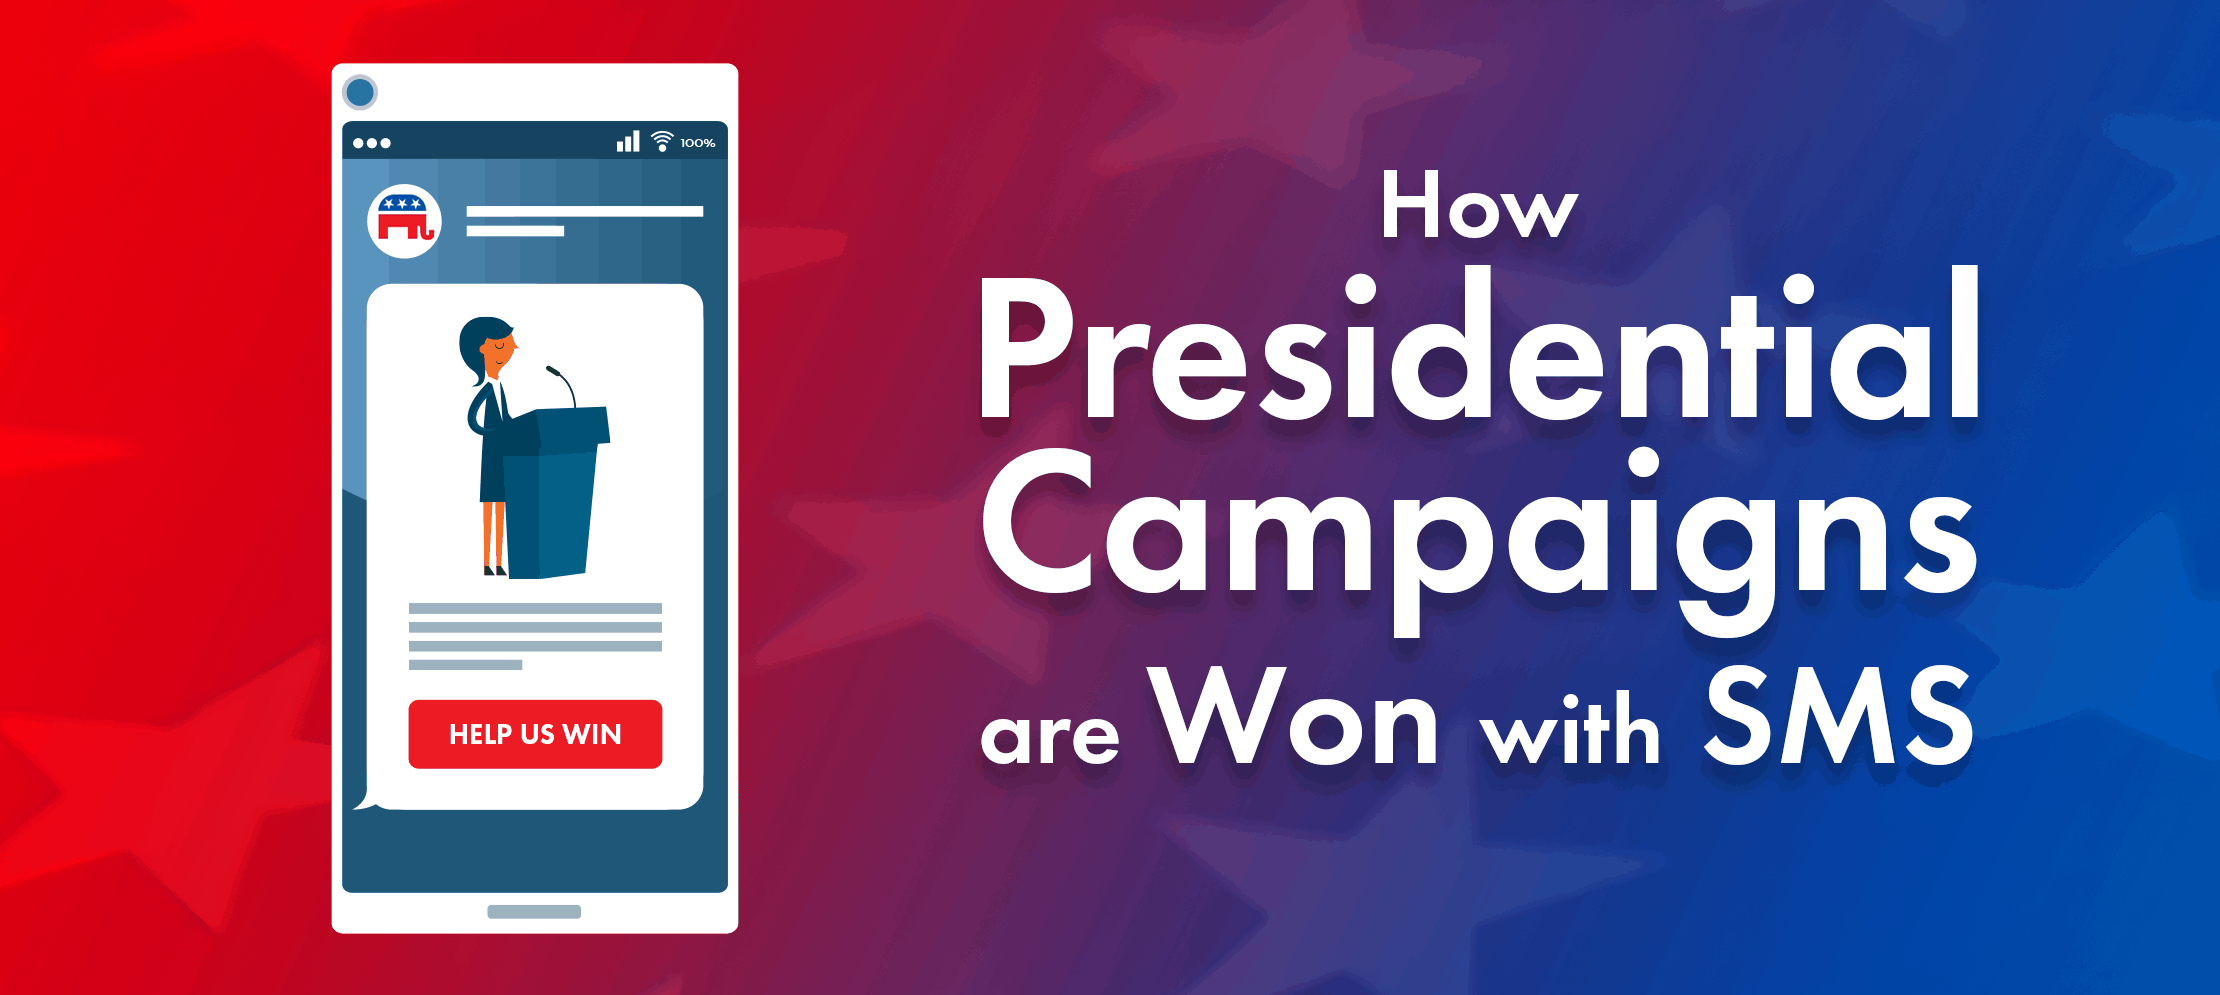 how presidential campaigns are won with sms